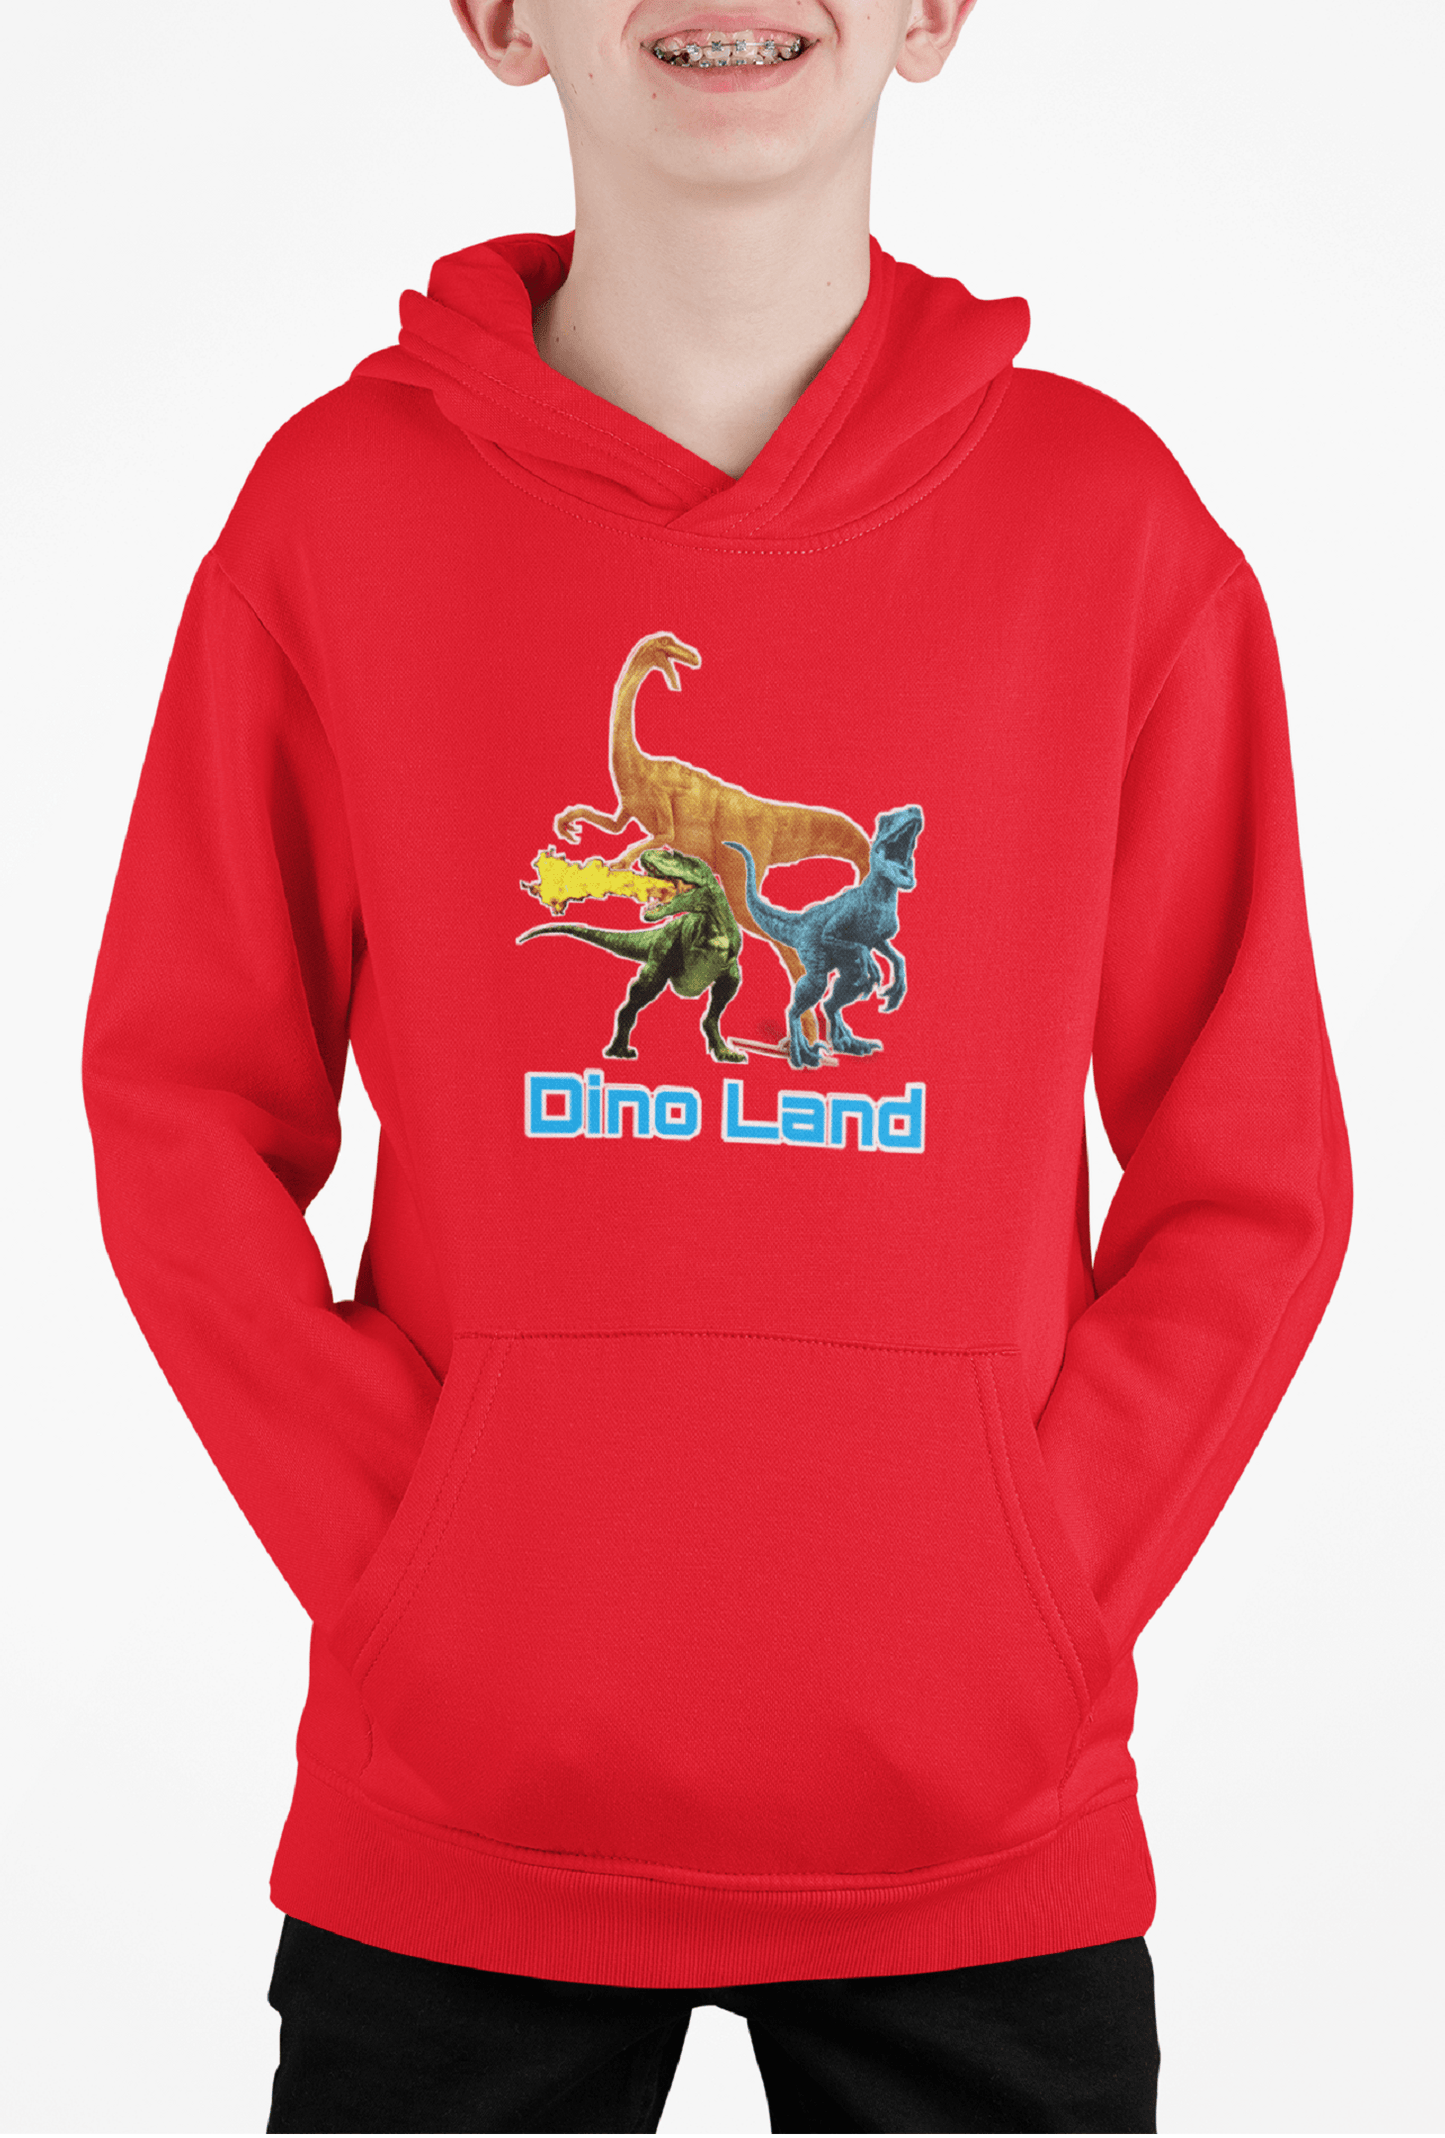 Red Hoodie for Kids with Dinosaur Design